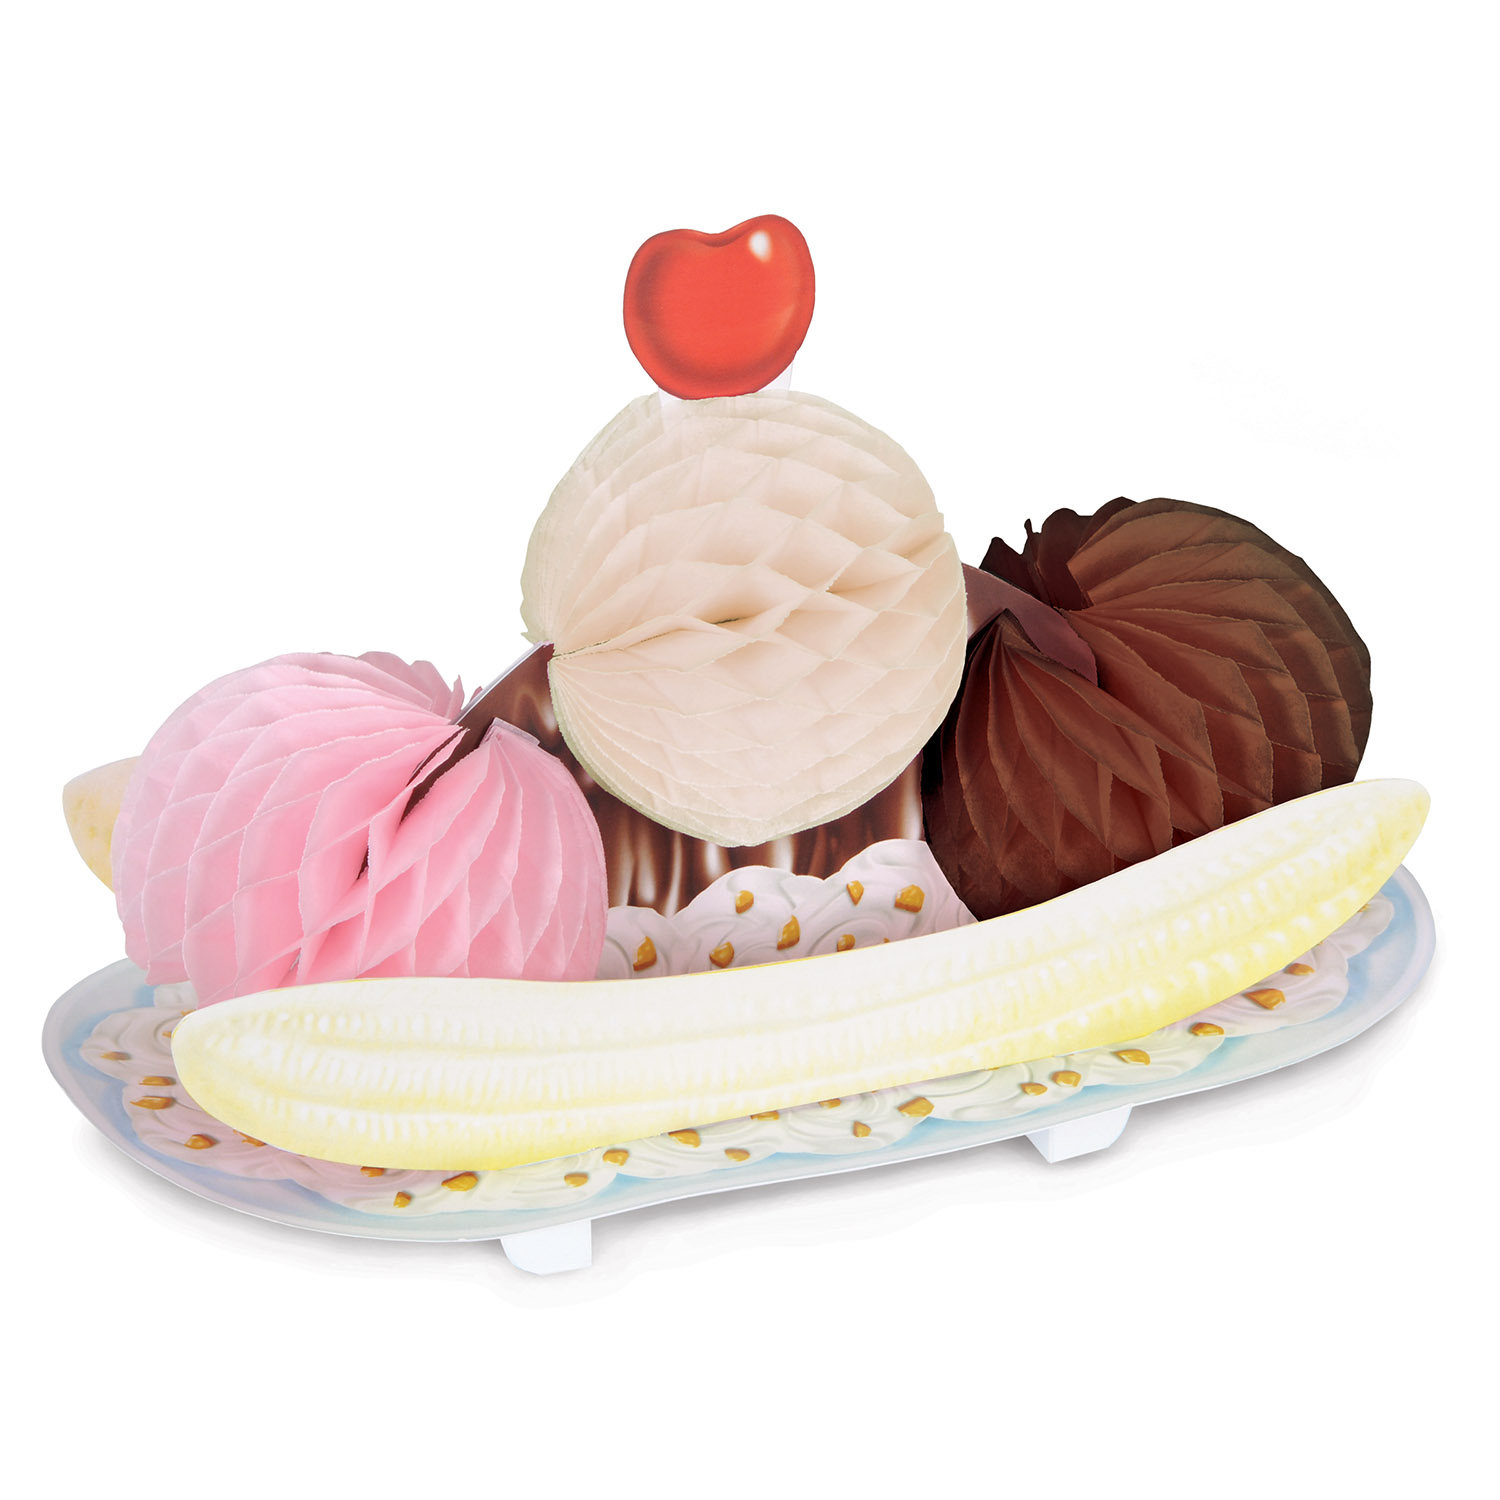 a centerpiece decoration that looks just like a banana split